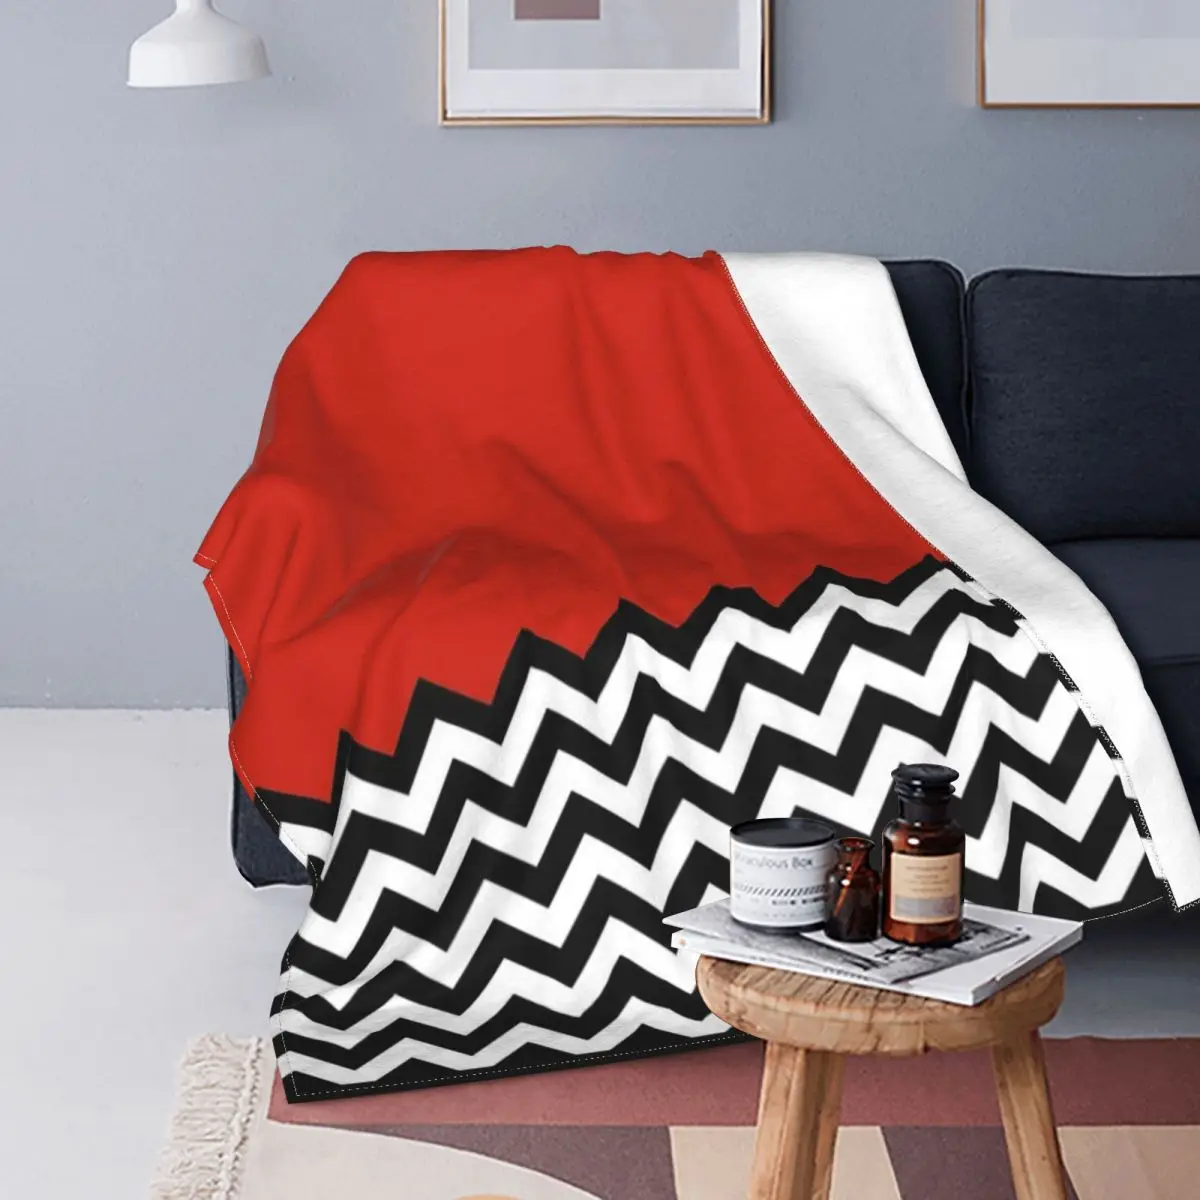 

Black Lodge (Twin Peaks) Inspired Graphic Blankets Flannel Portable Throw Blankets Sofa Throw Blanket For Couch Bedding Throws